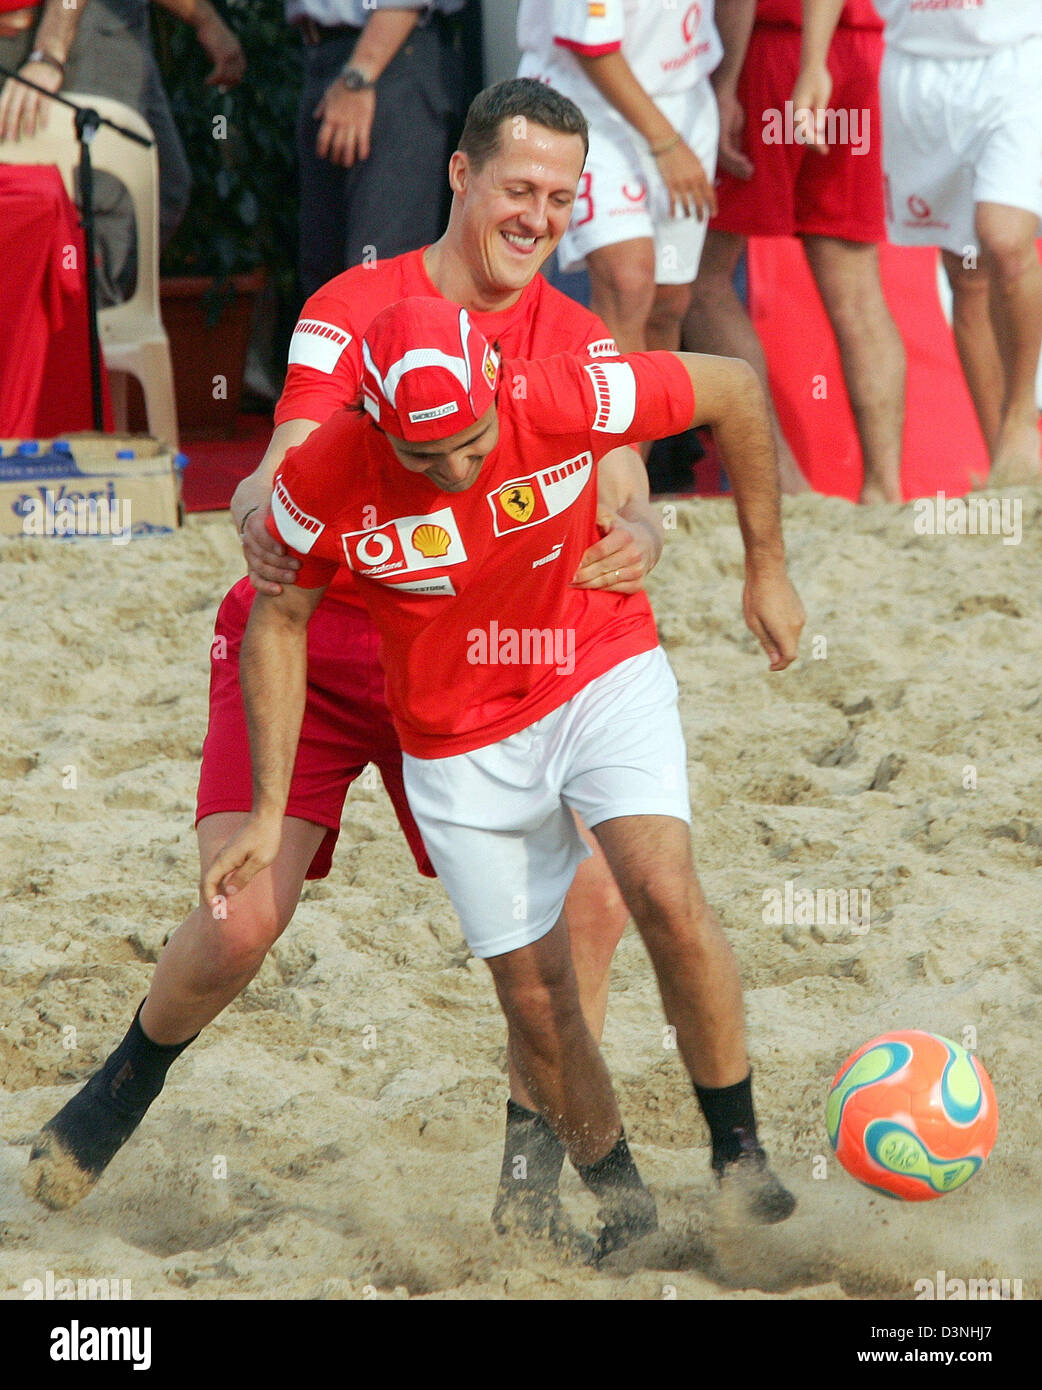 German Formula One driver Michael Schumacher (background) of Scuderia Ferrari F1 team and his Brazilian team mate Felipe Massa challenge during a beach soccer match at the race track Circuit de Catalunya in Montmelo near Barcelona, Spain, Thursday 11 May 2006. The Grand Prix of Spain takes place on Sunday. Photo: Gero Breloer Stock Photo